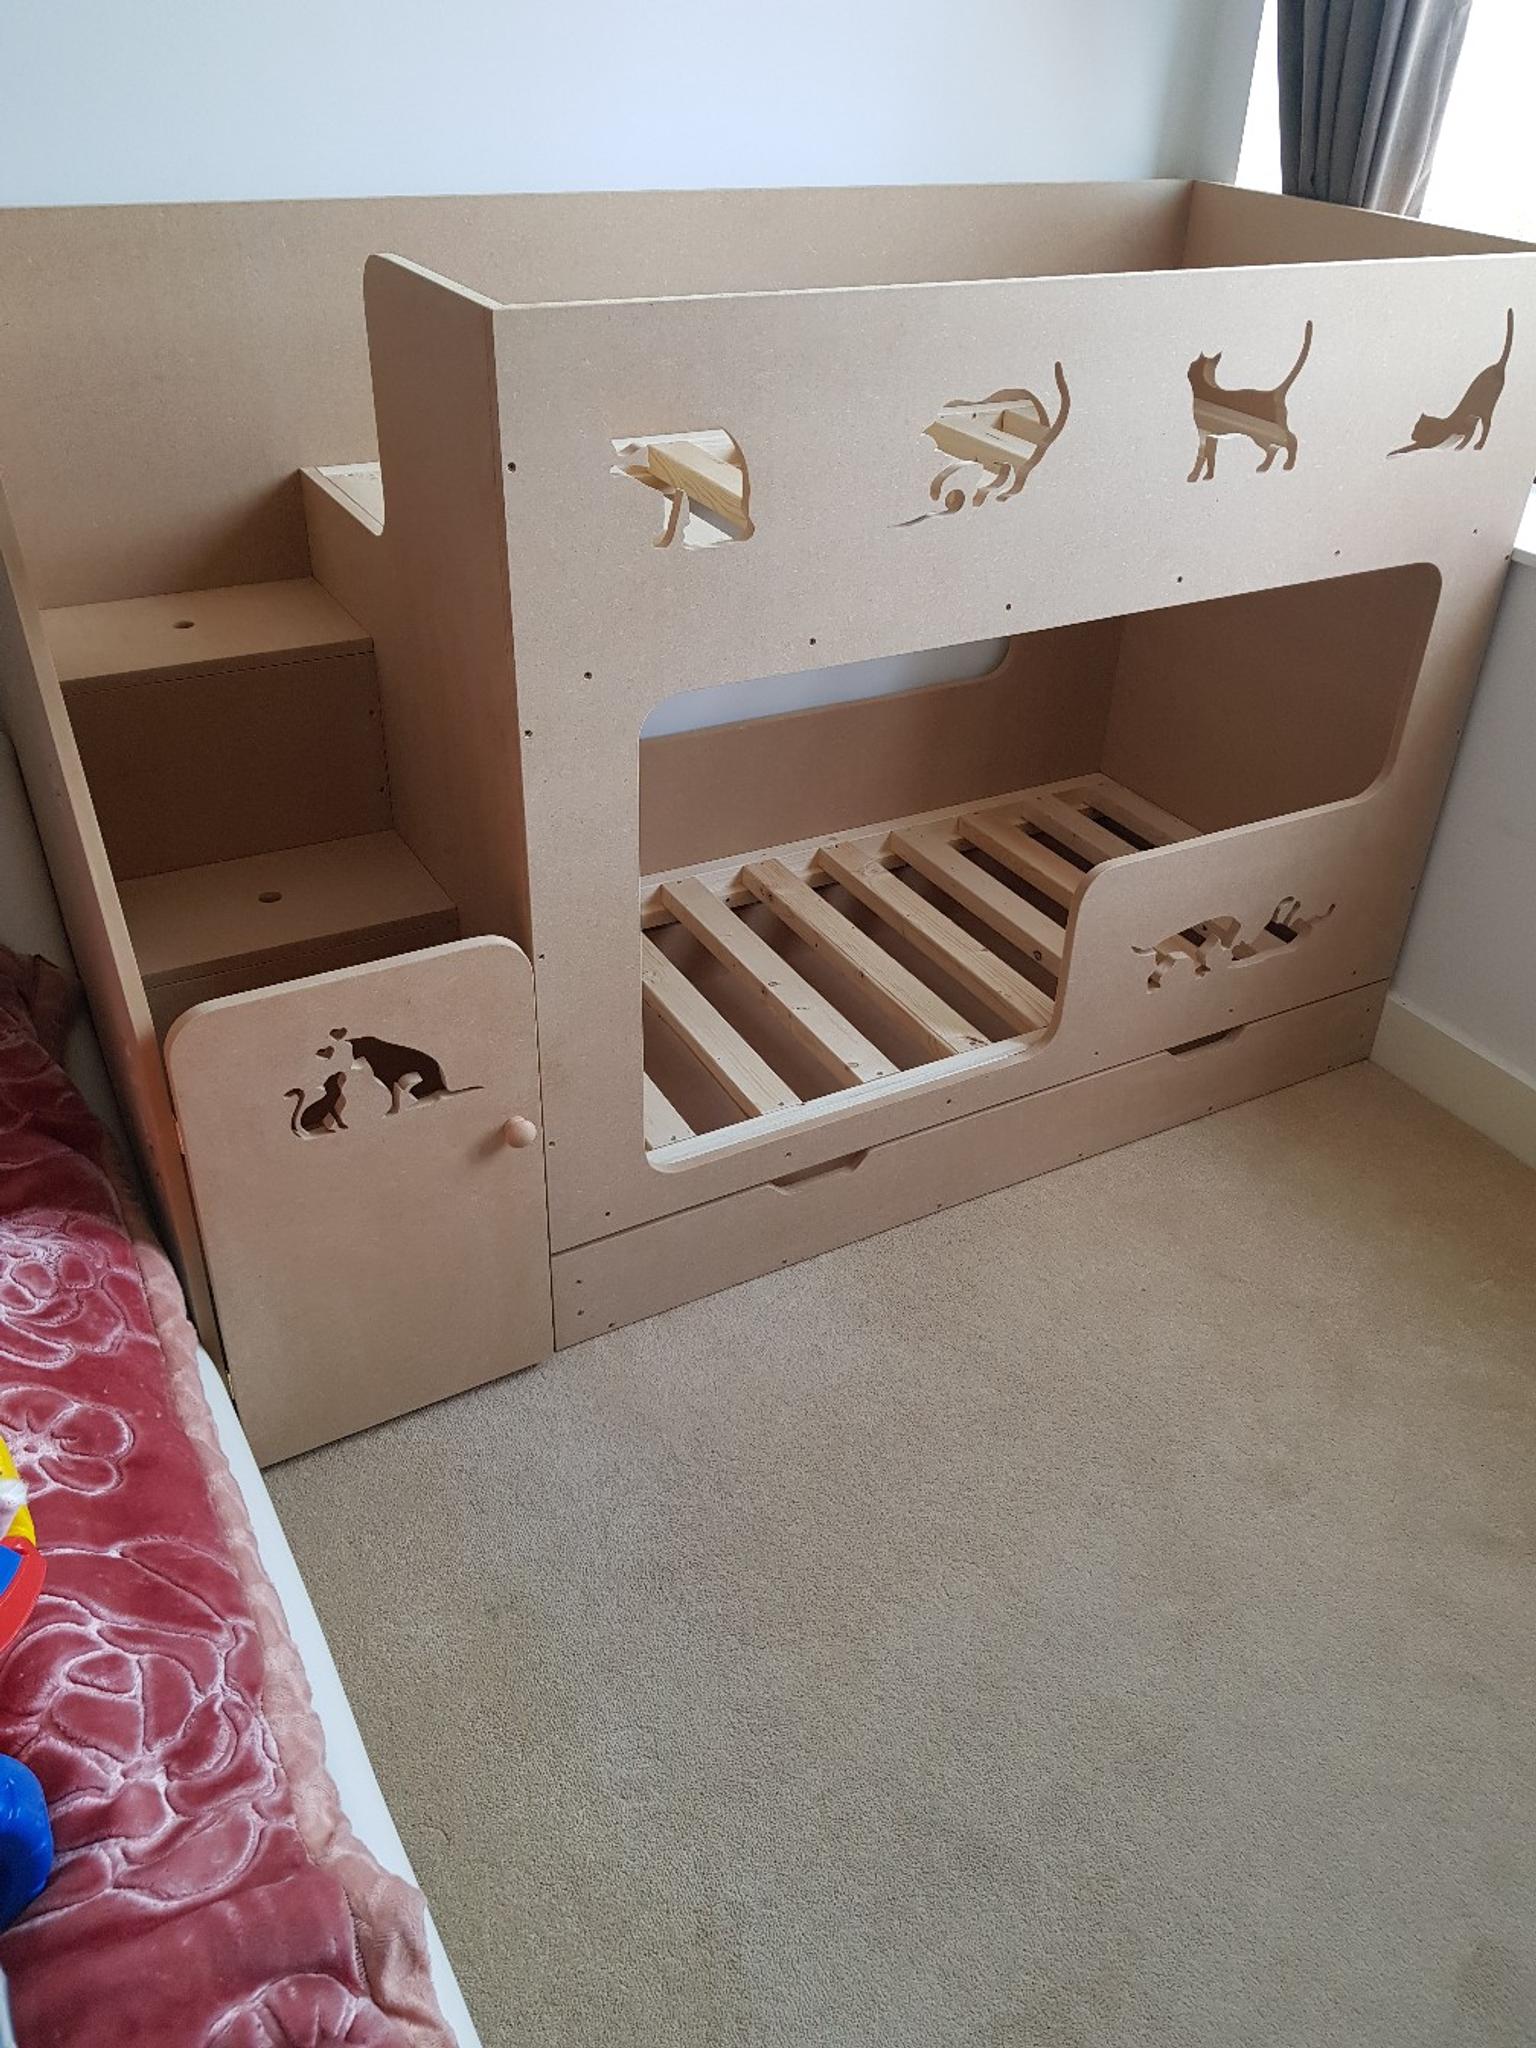 Toddler Bunk Bed In B31 Birmingham For, How To Make A Toddler Bunk Bed